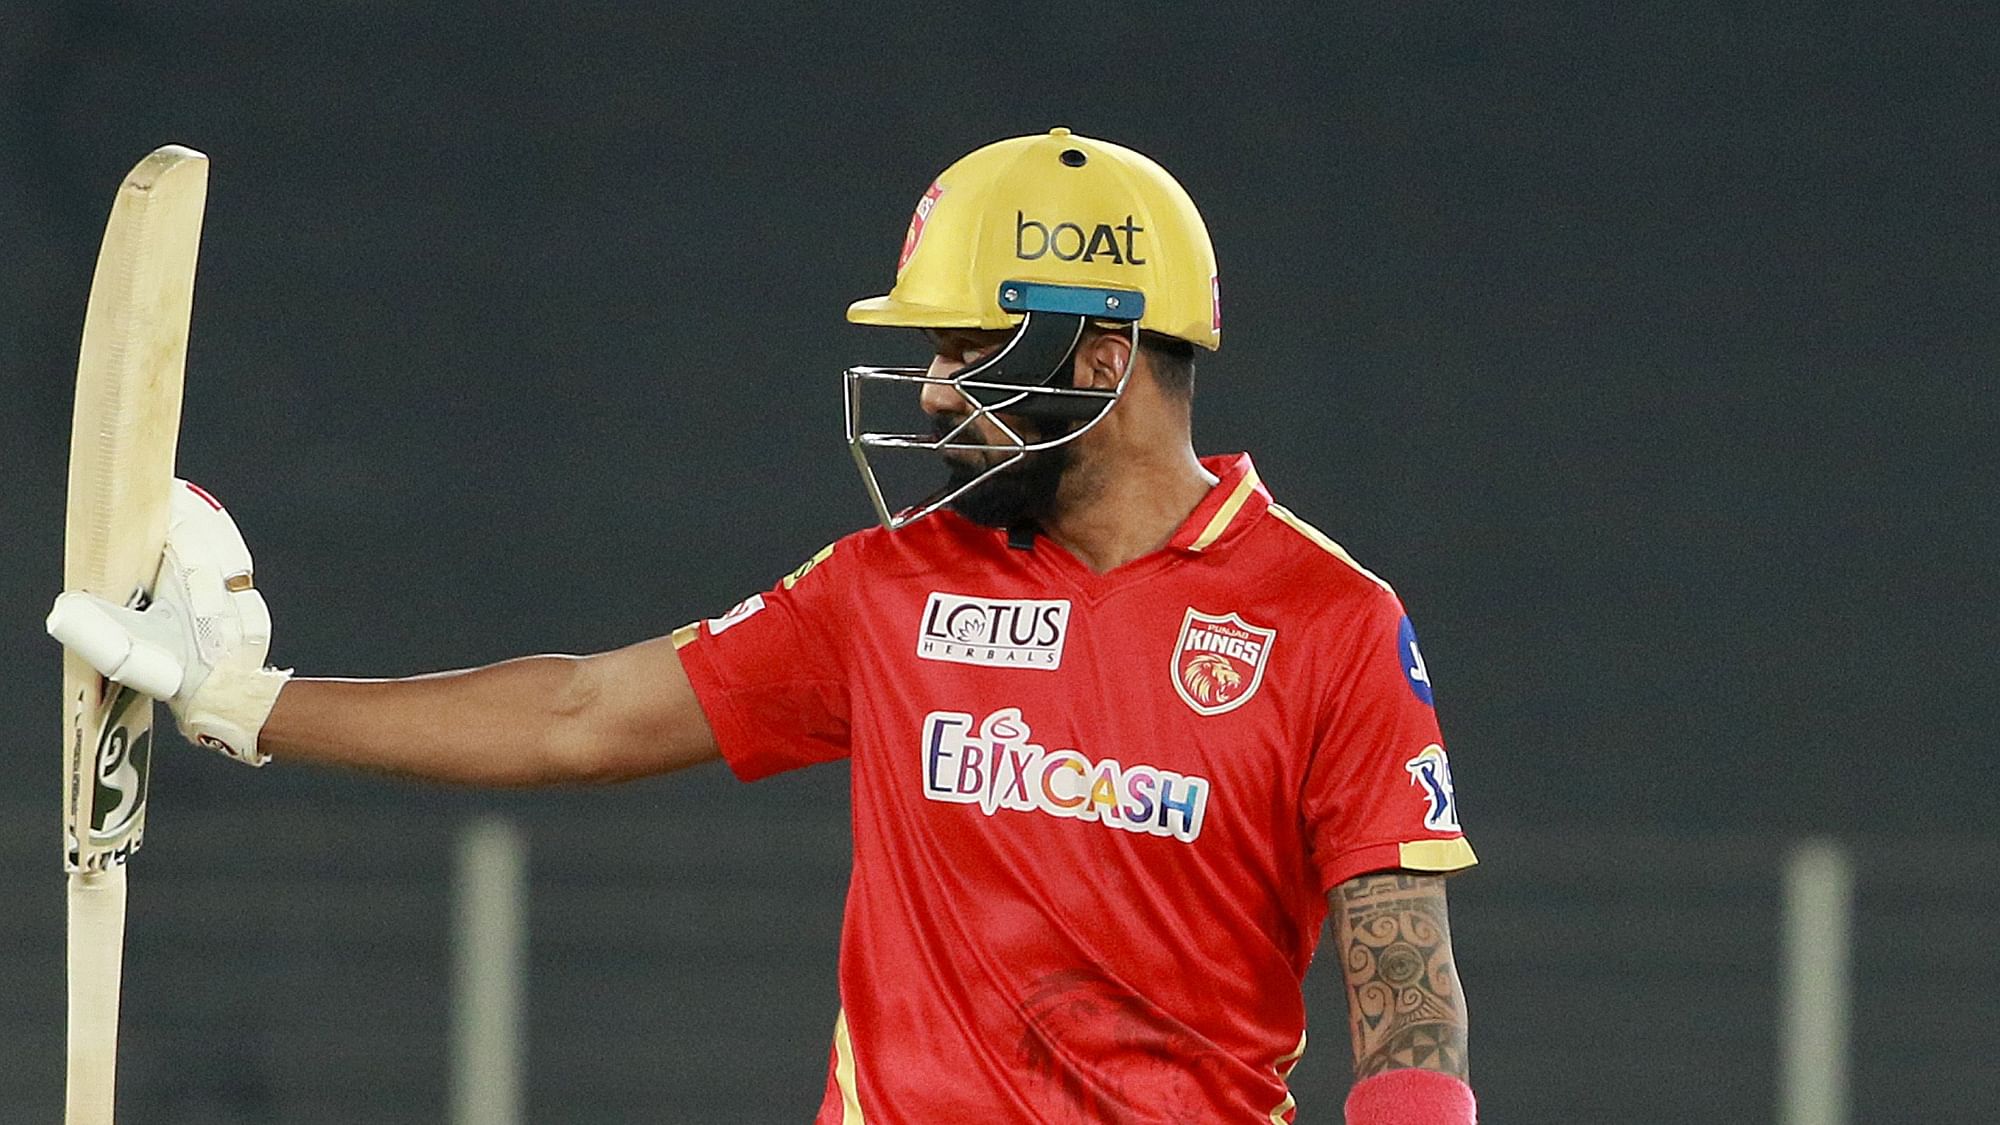 KL Rahul remained unbeaten on 91 off 57 deliveries as he helped Punjab Kings post 179/5 against Royal Challengers Bangalore.